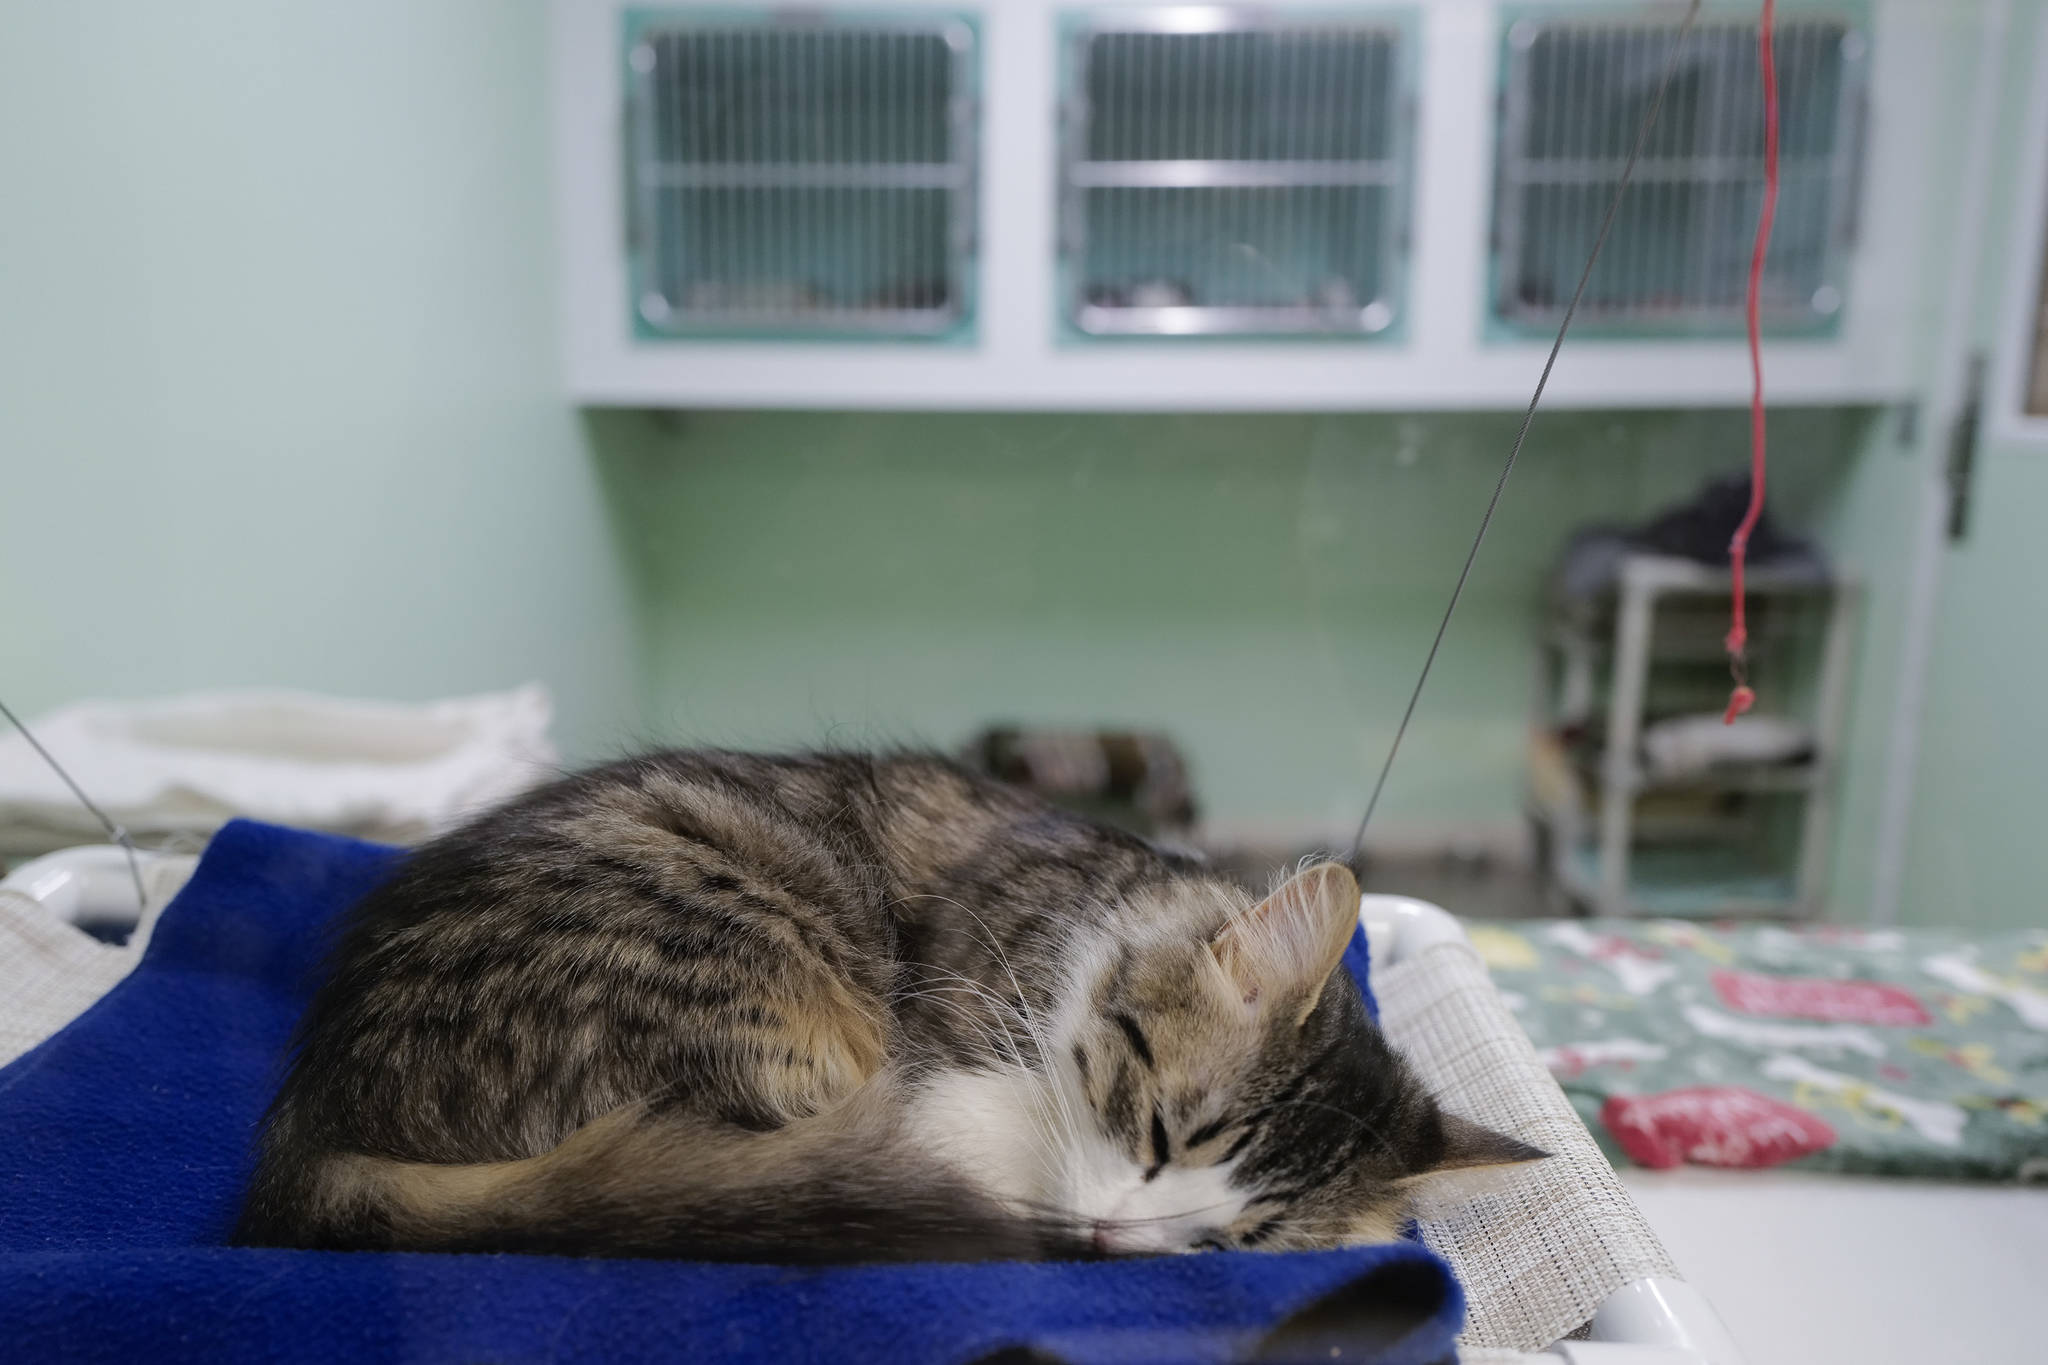 An adult cat rests in a common room at the Juneau Animal Rescue on Tuesday, July 2, 2019. (Michael Penn | Juneau Empire)